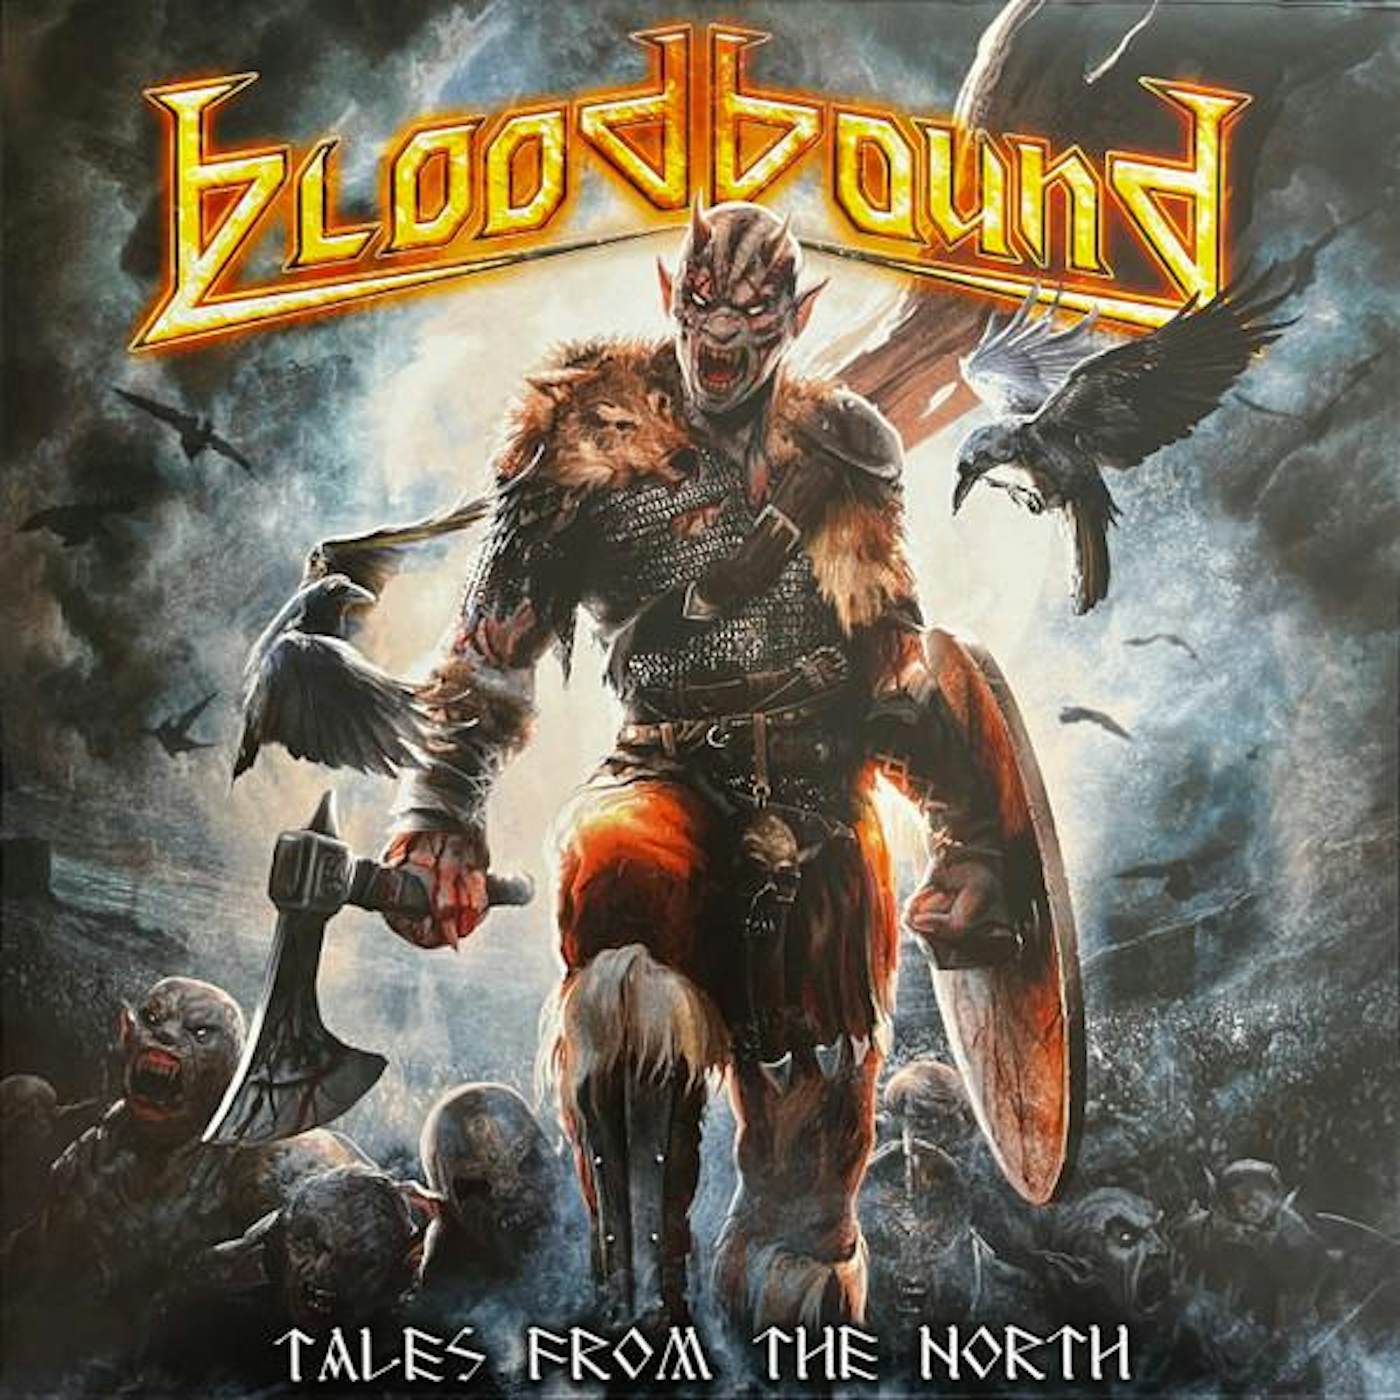 Bloodbound Tales From The North (Black & White Marble) Vinyl Record